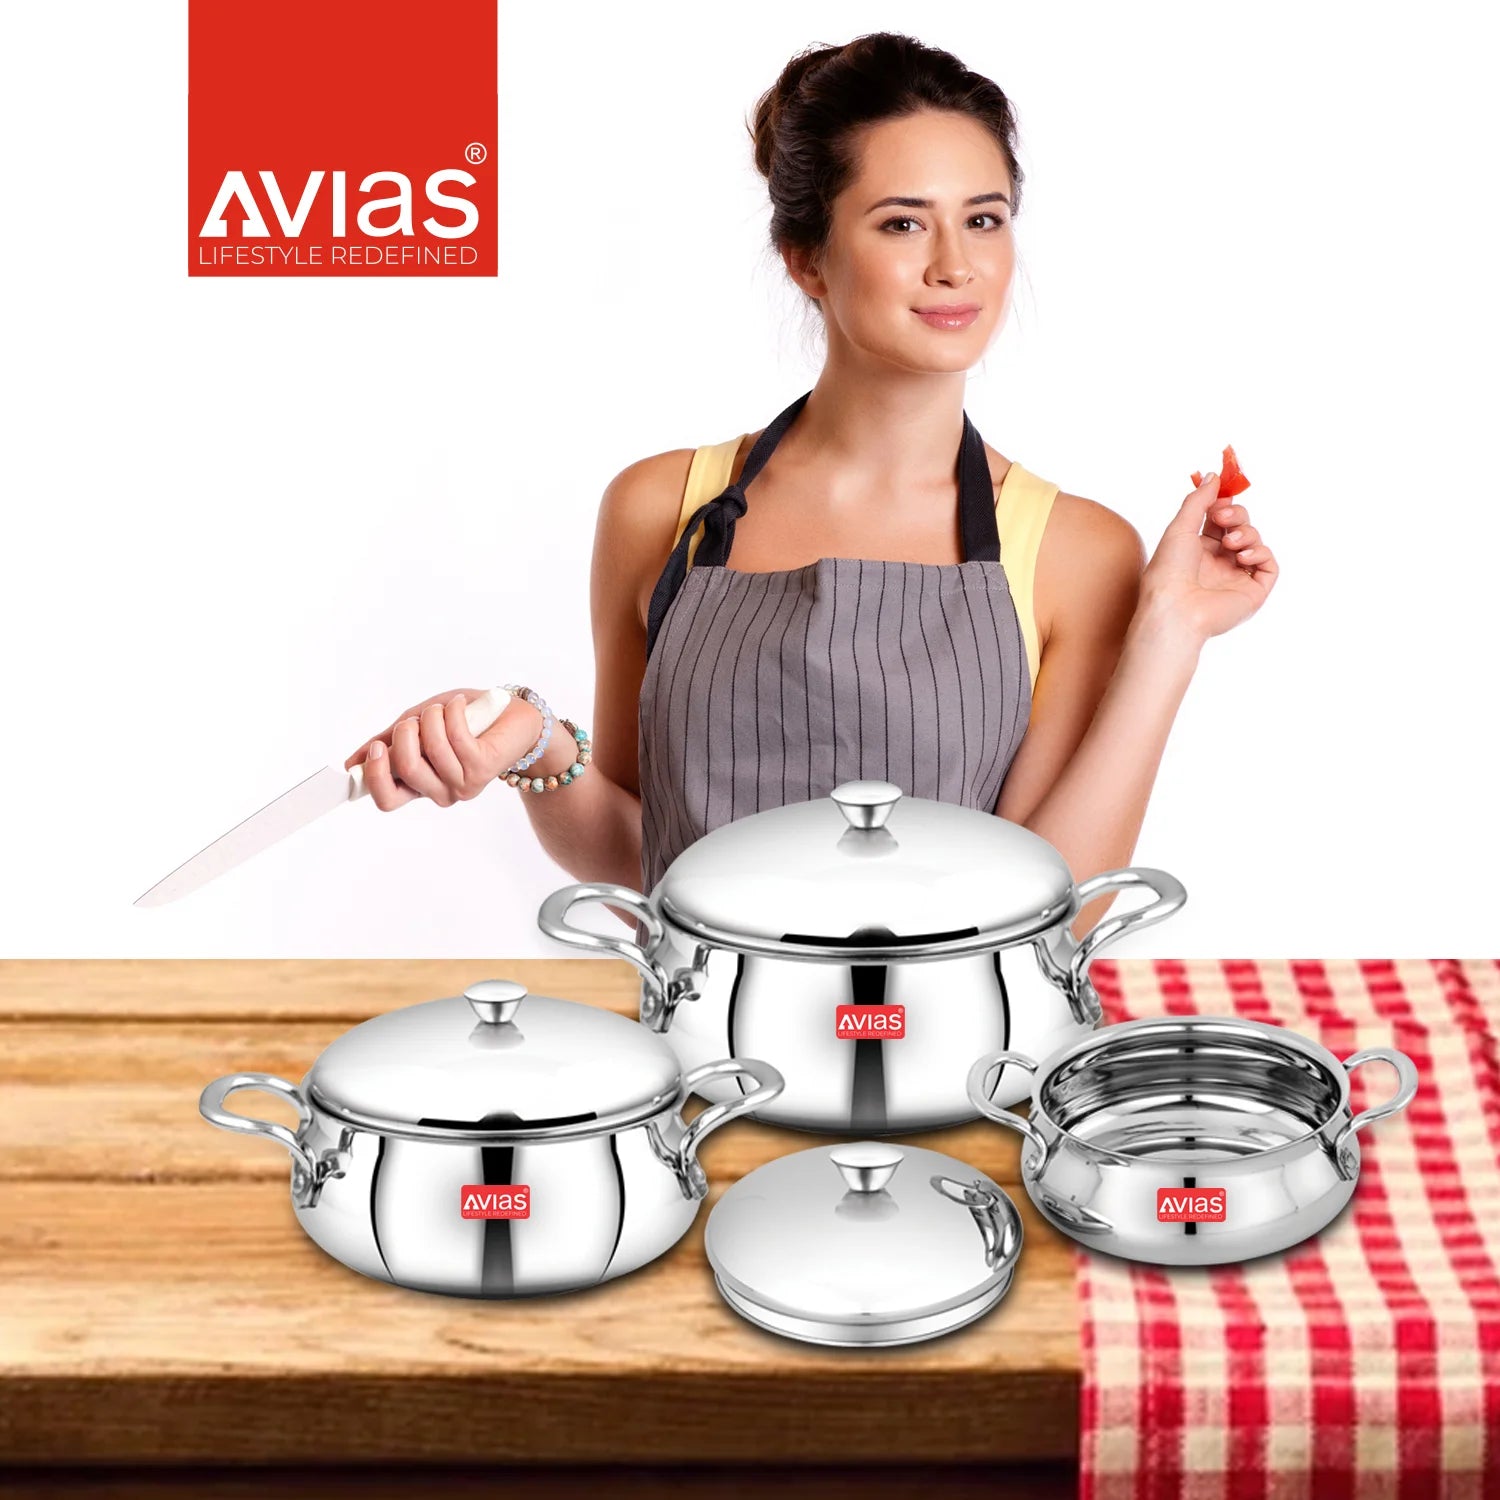 AVIAS Aroma High-quality stainless steel Handi Set for cooking and storing food